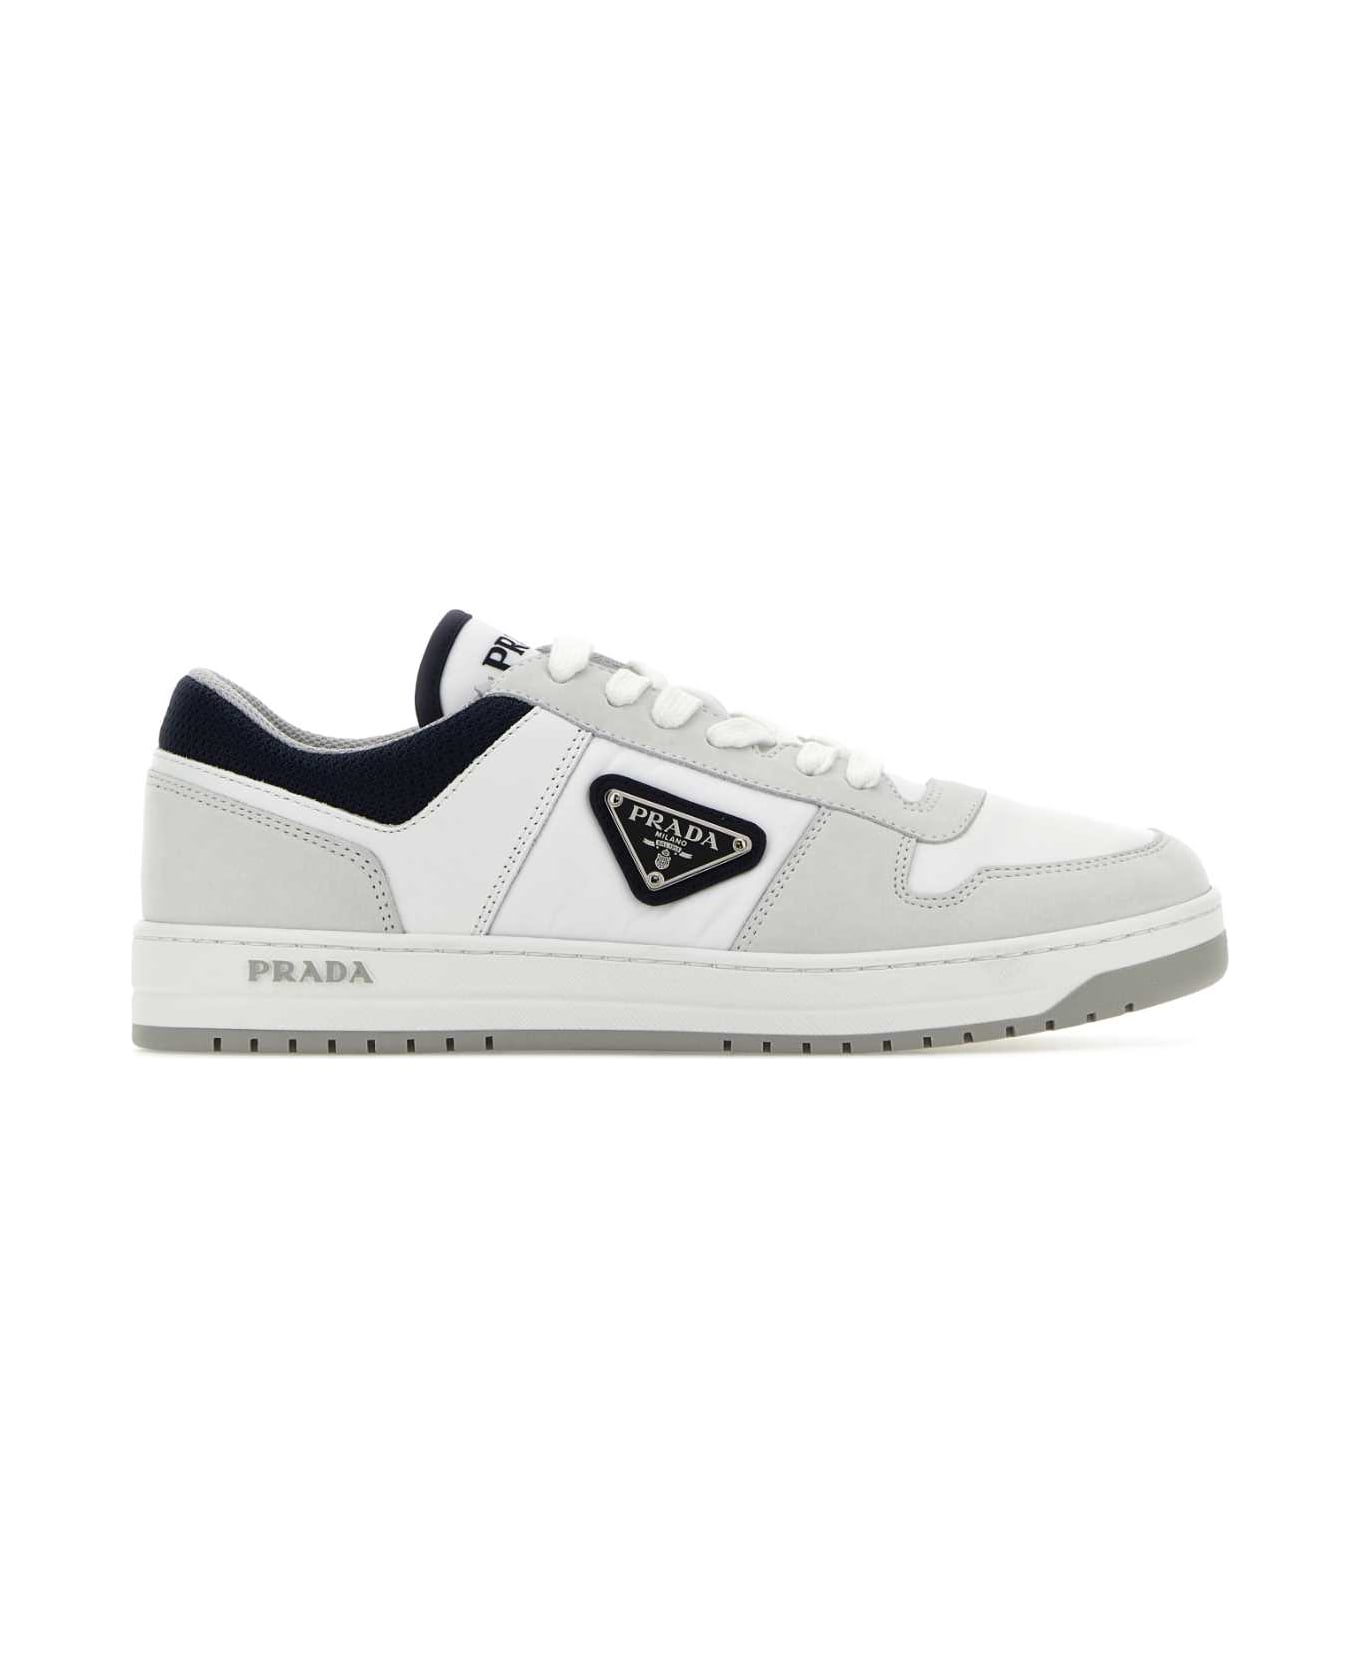 Prada Multicolor Re-nylon And Nubuck Downtown Sneakers - BIANCOOLTREMARE